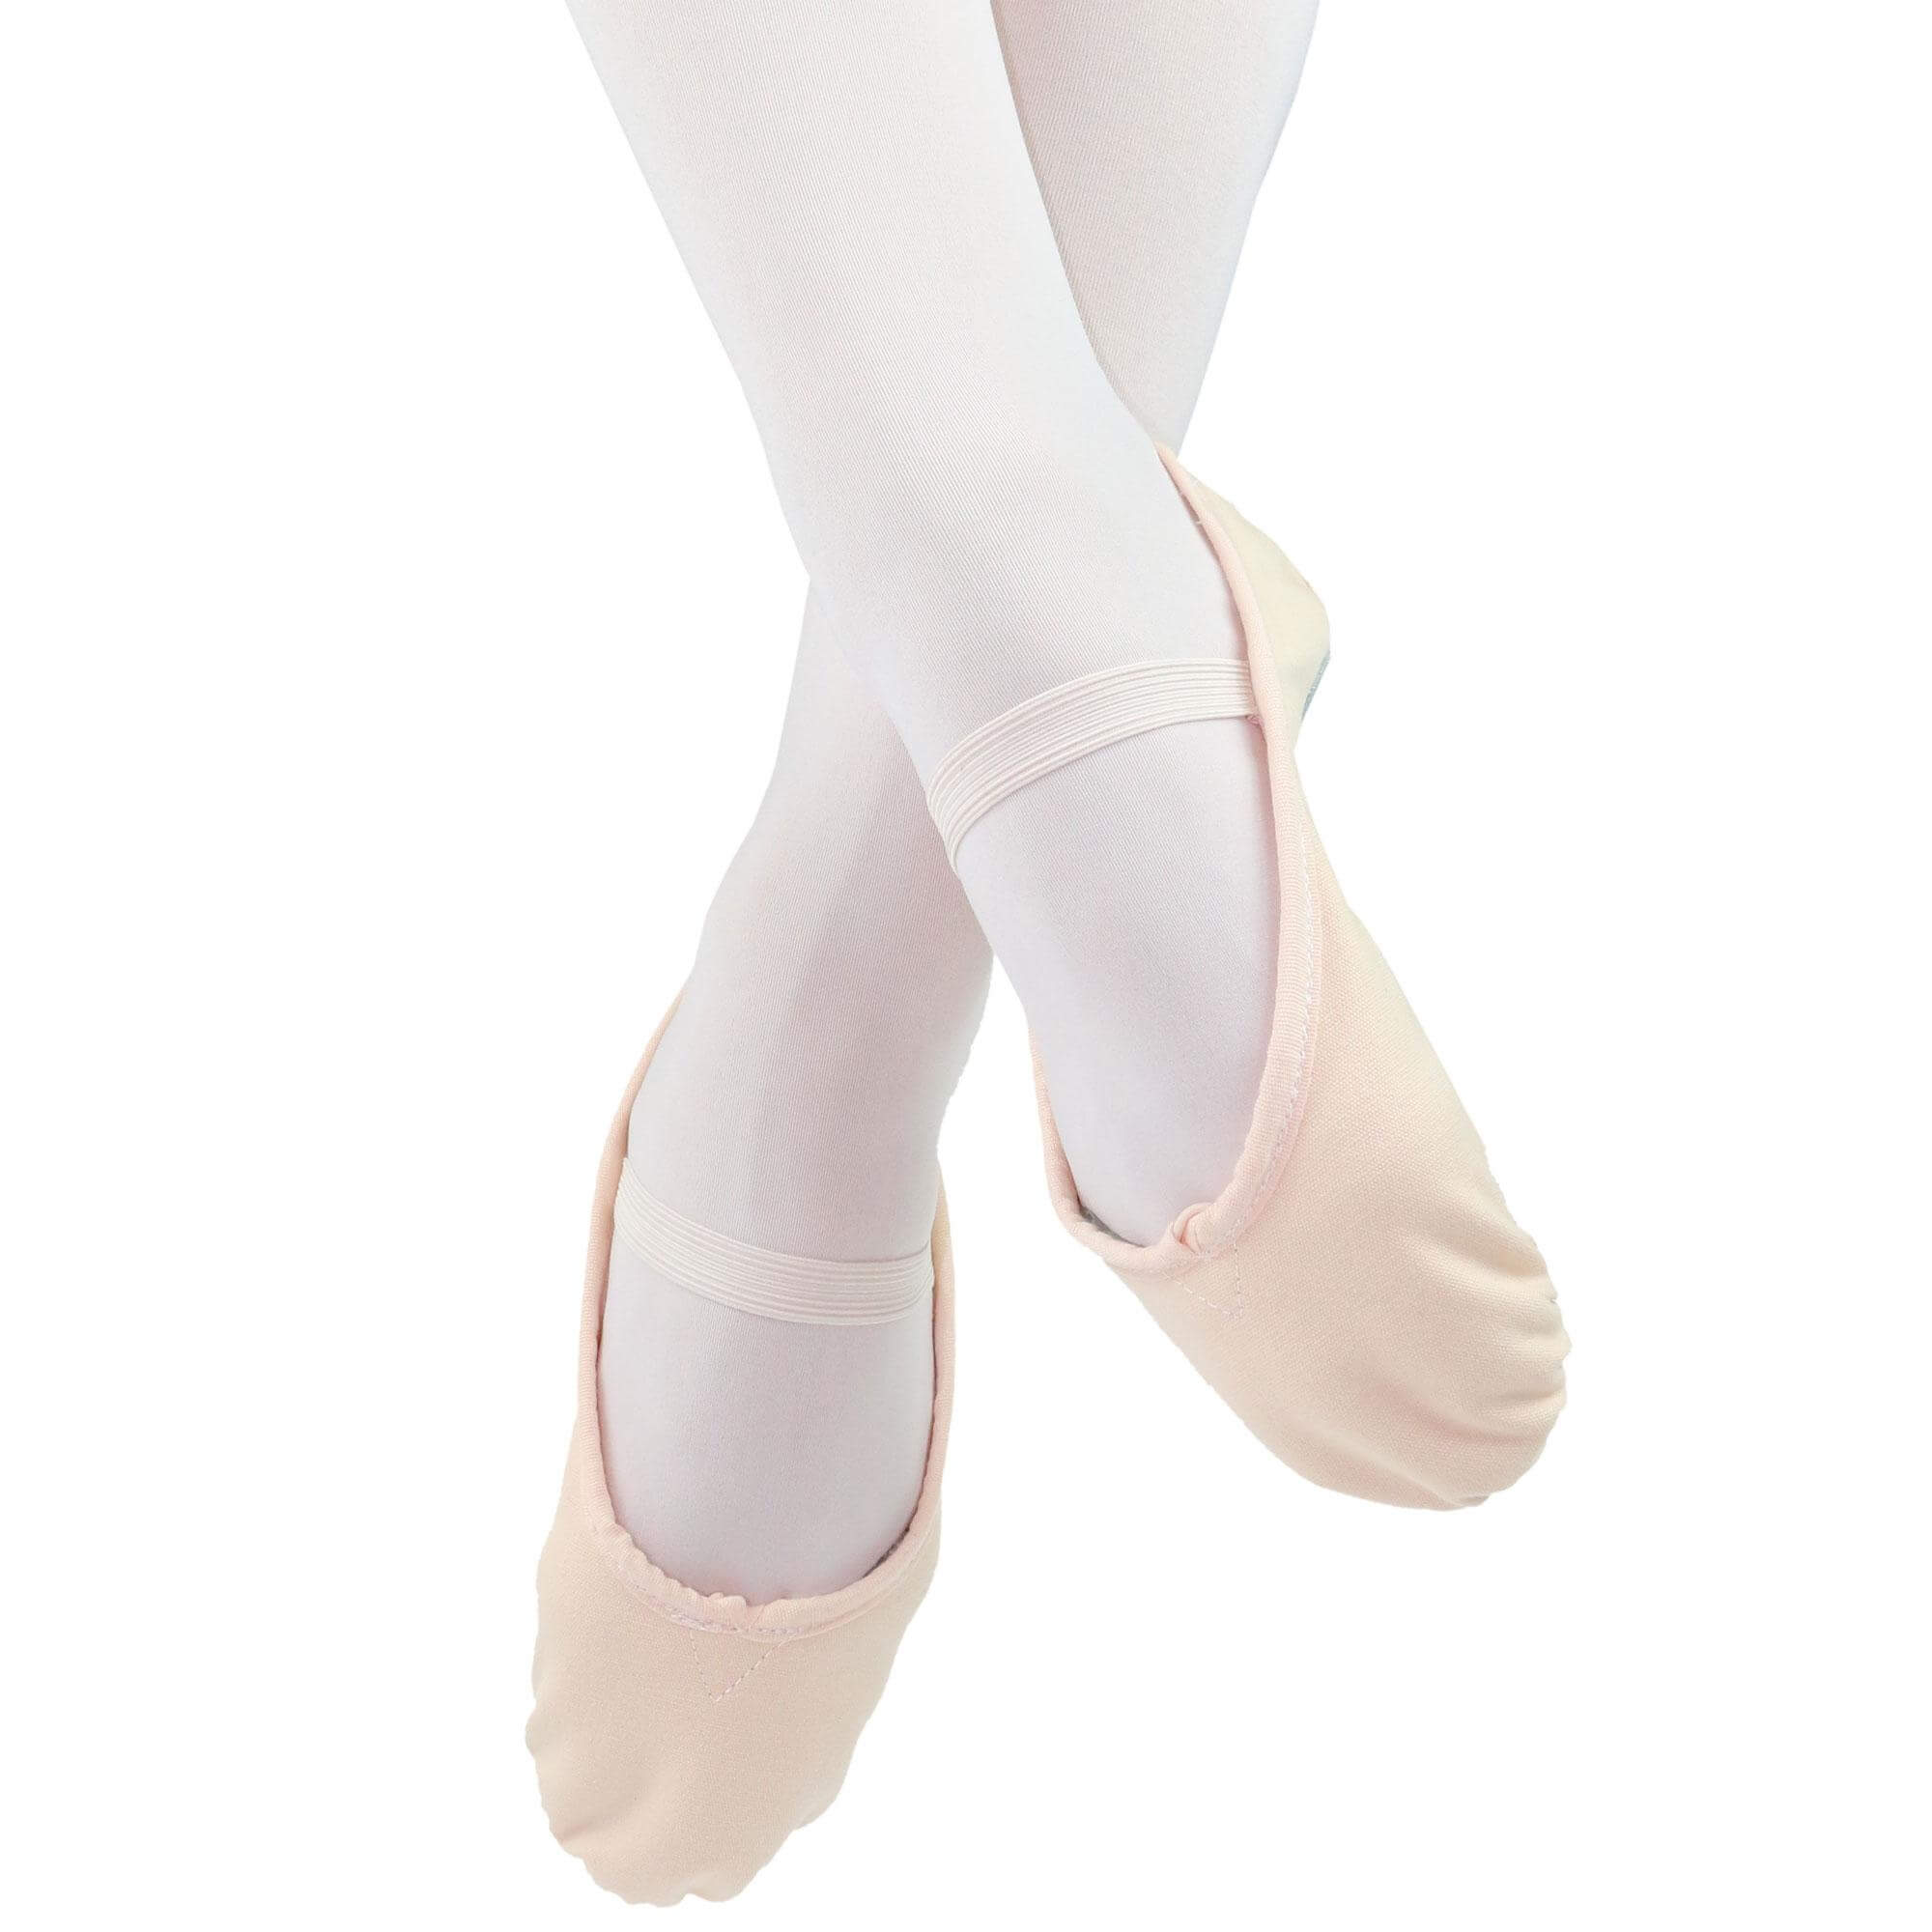 Danzcue Adult Full Sole Canvas Ballet Slipper - Click Image to Close